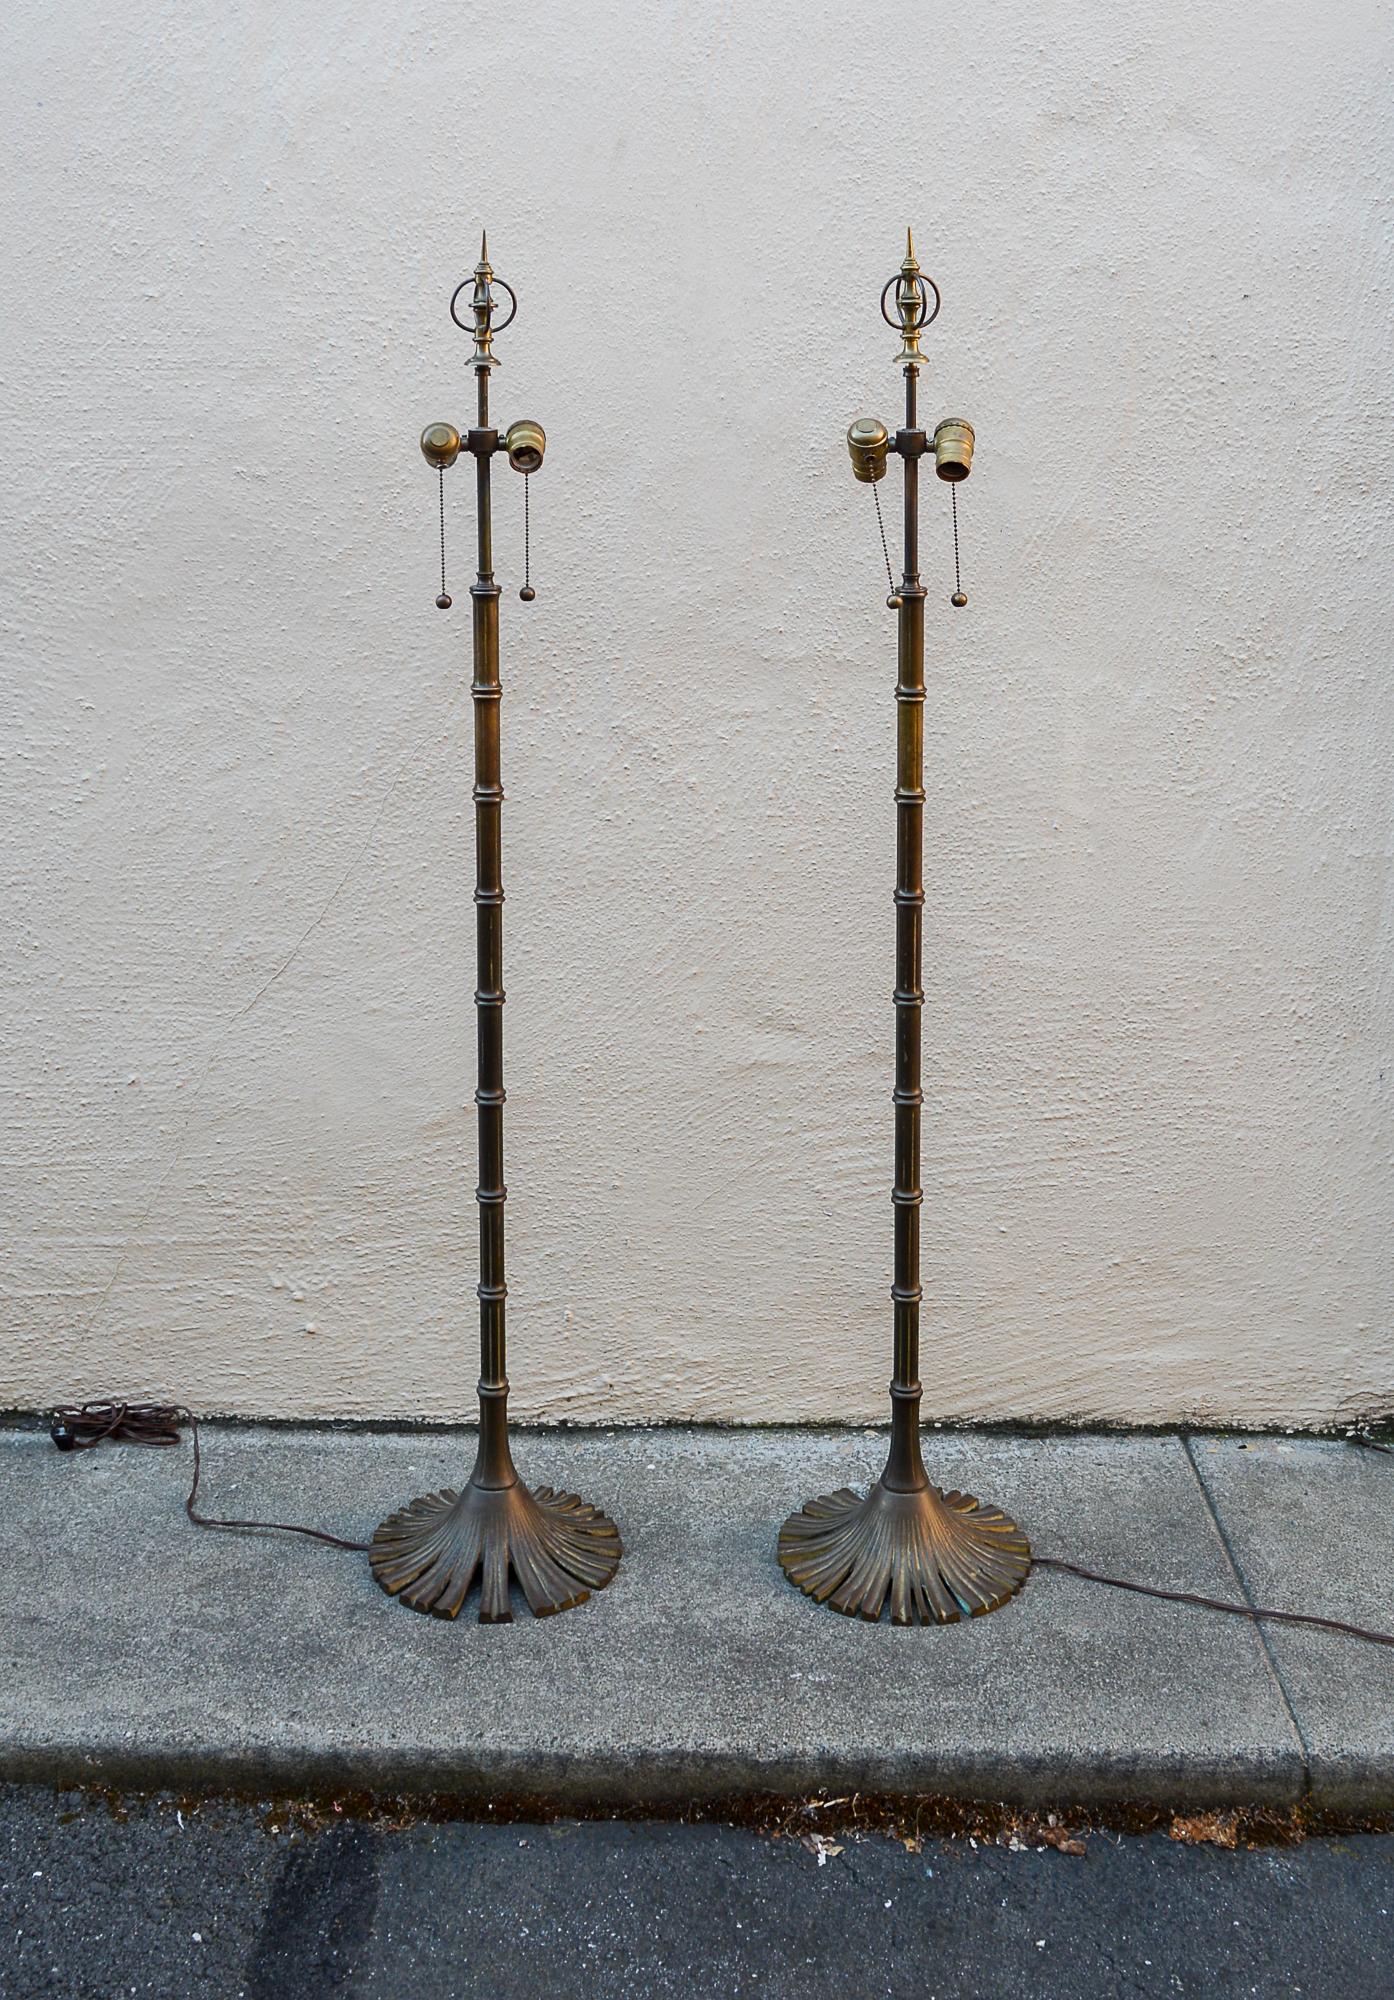 Pair of faux bamboo floor lamps made by Chapman Manufacturing. These have the original finials. The height given is to the top of the finial. The sockets are 45 inches tall. The lamps have developed a nice patina over time.